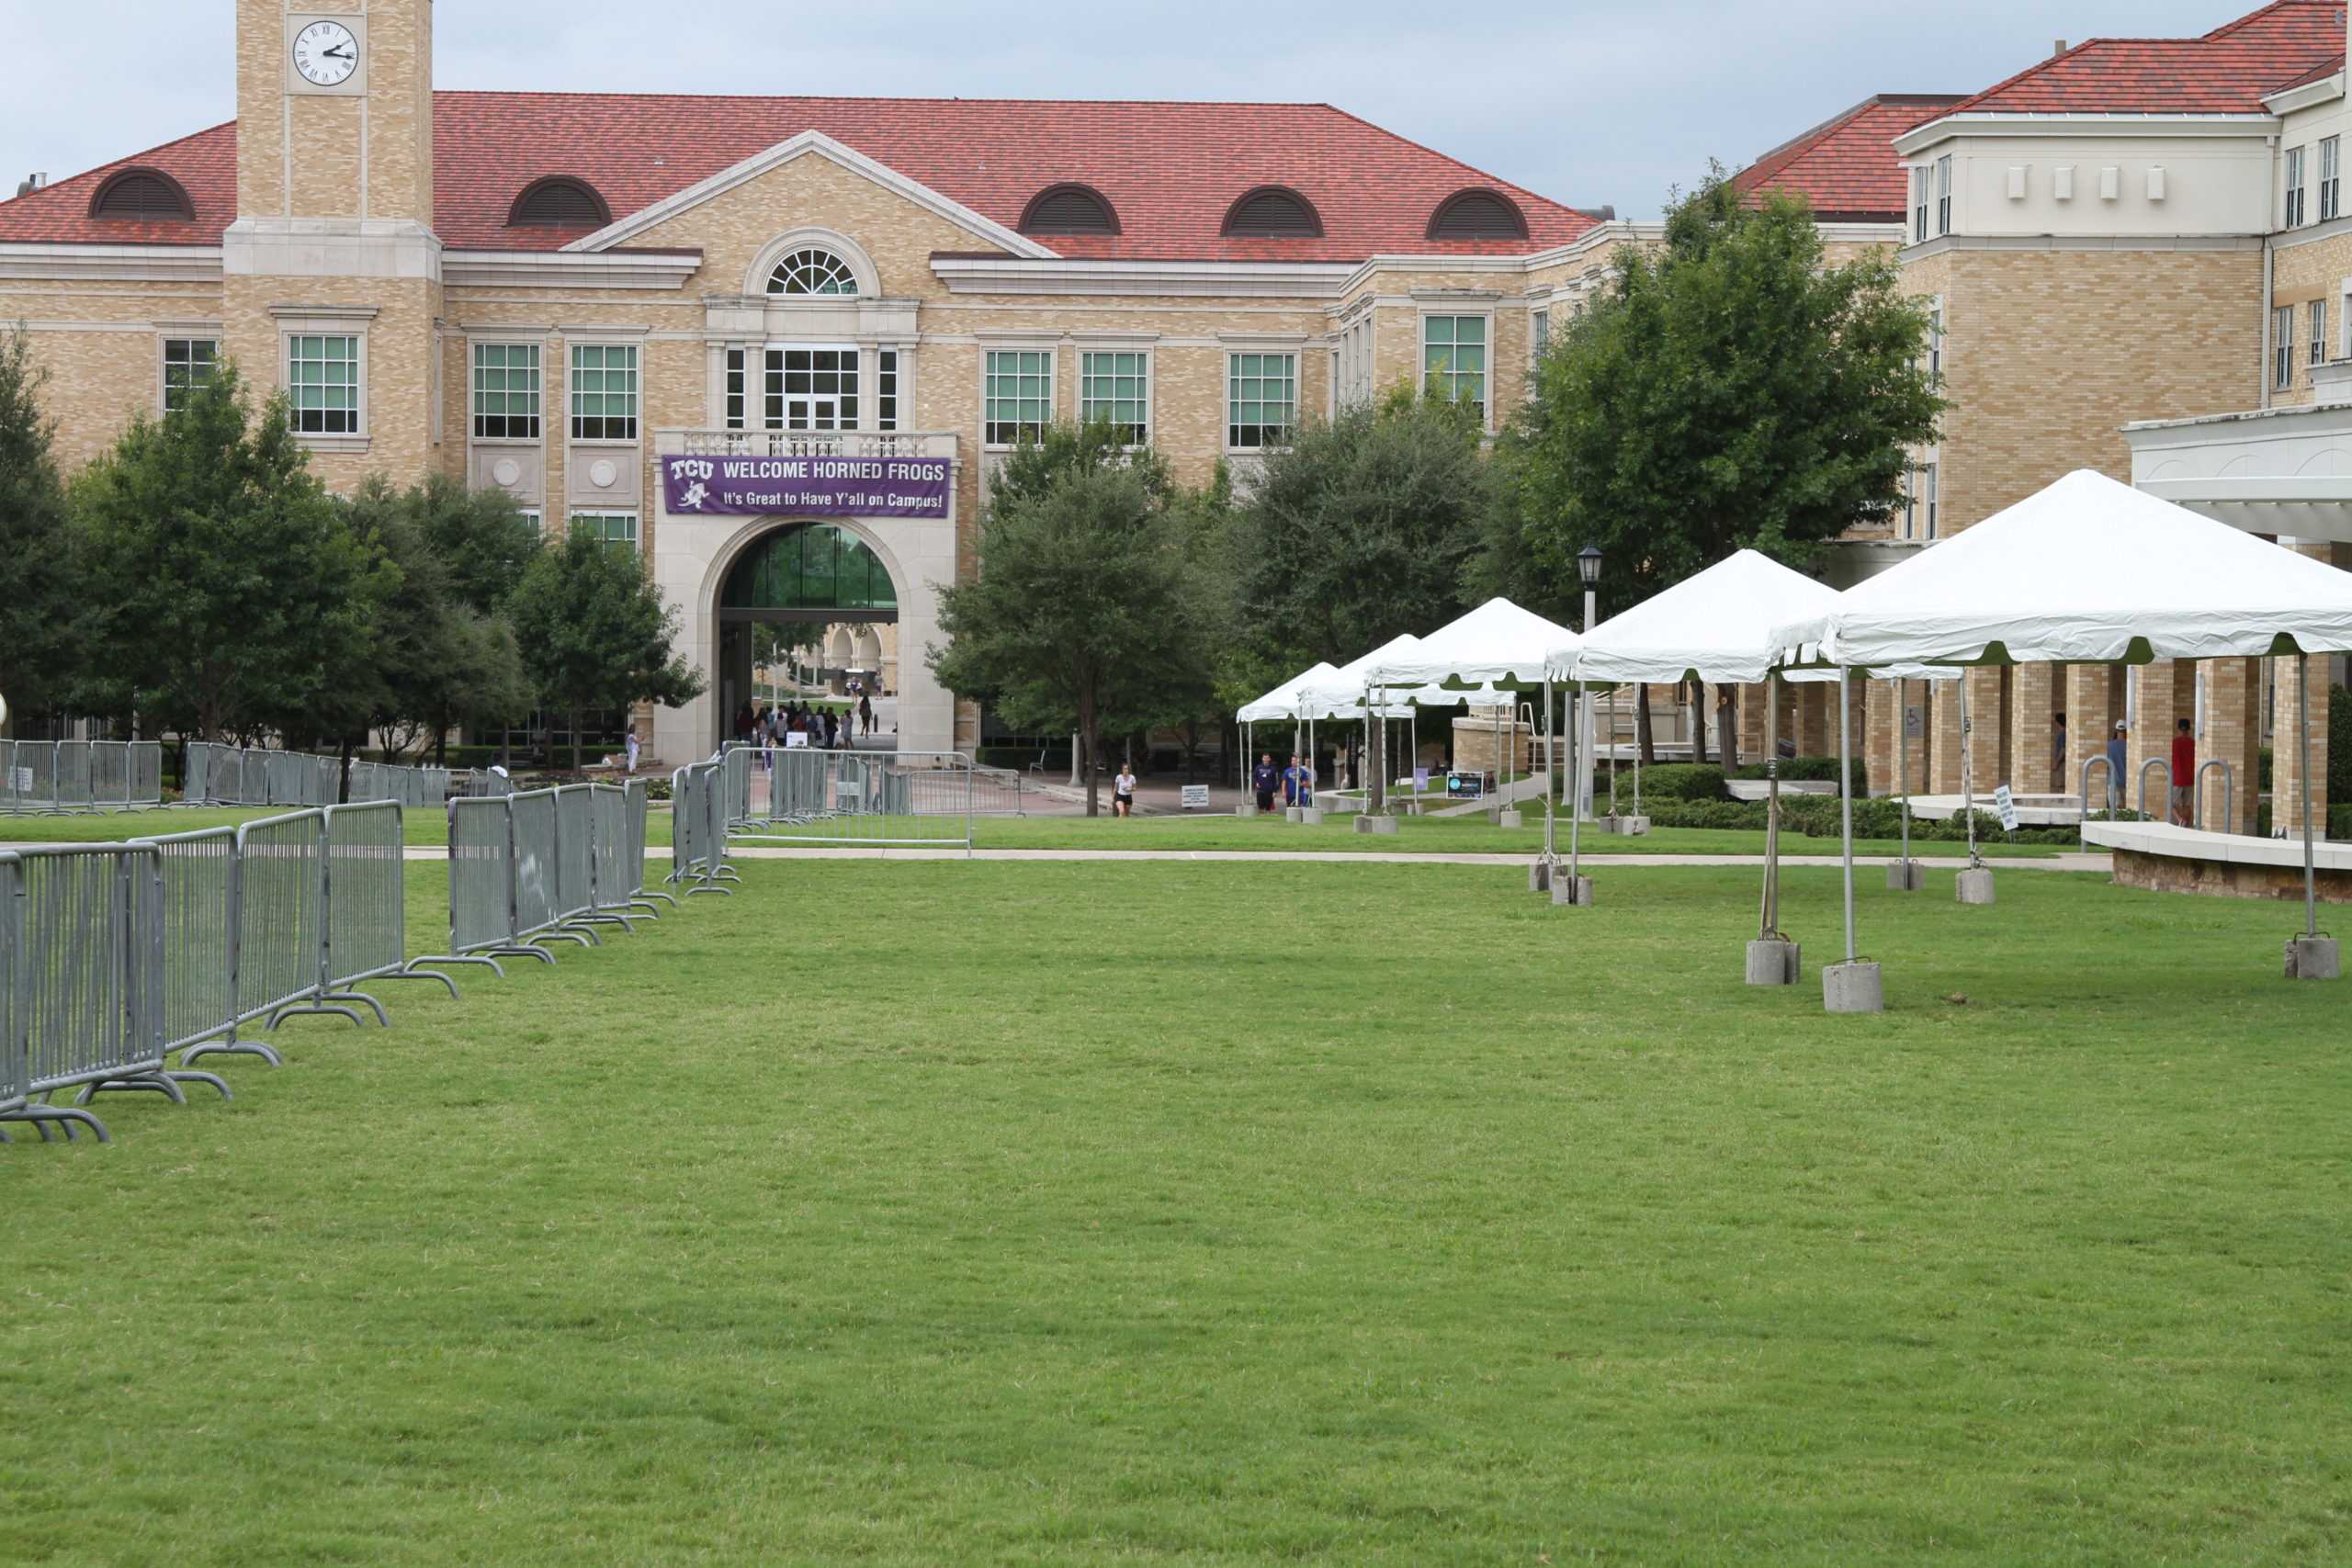 TCU+changed+the+way+new+sorority+women+celebrated+their+bids+after+the+commons+were+closed+for+the+rainy+weather.